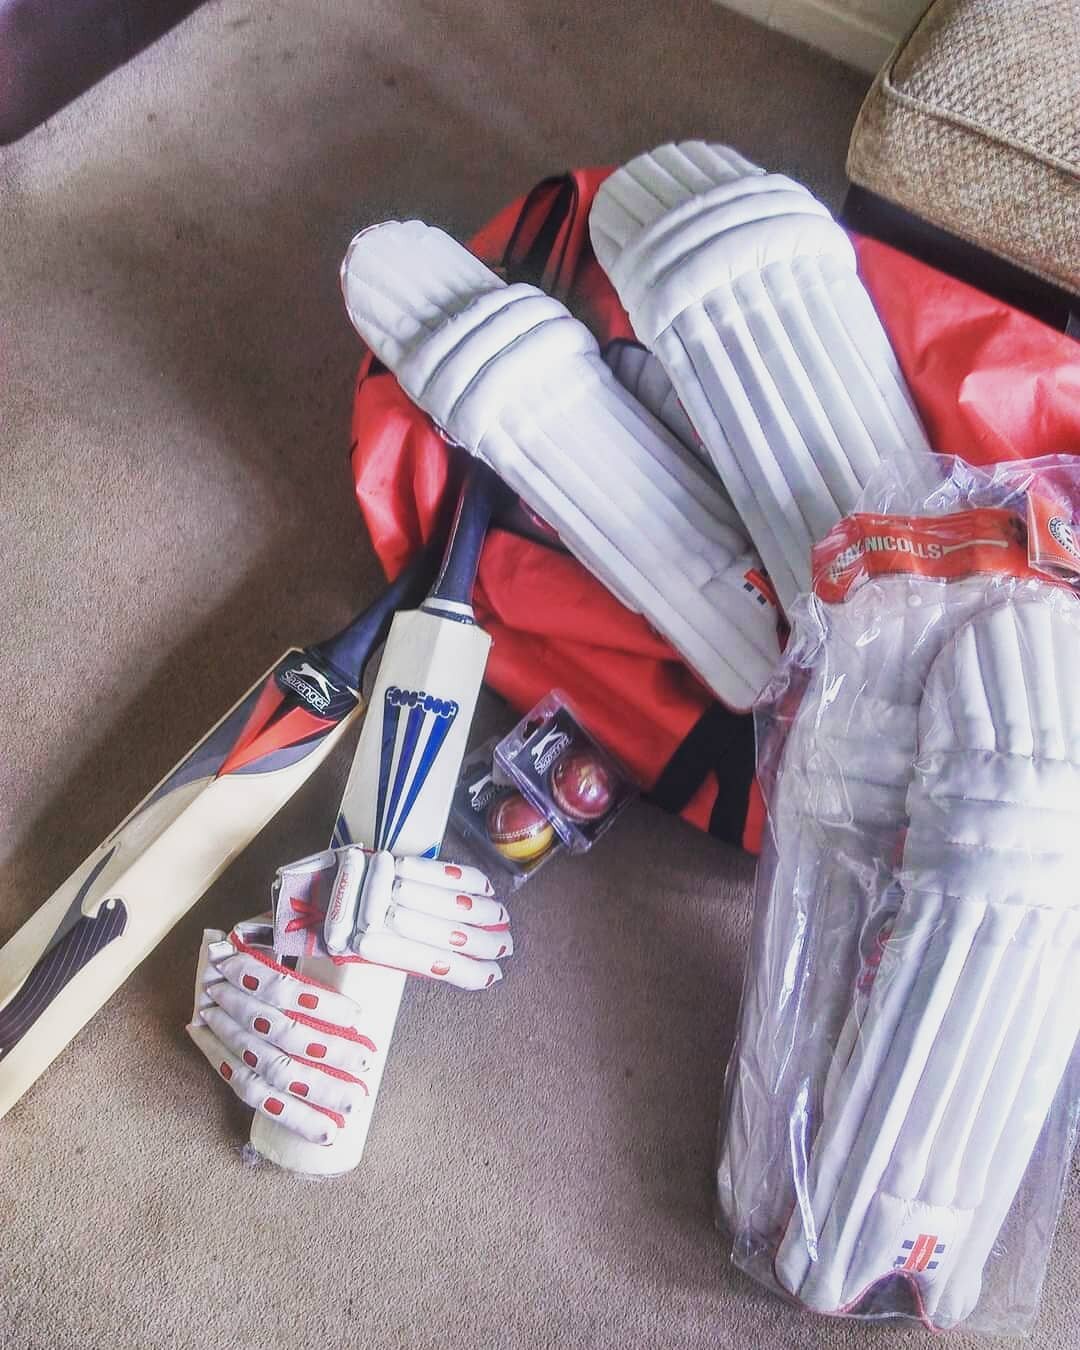 Many years ago, our cafe building used to be a cricket pavilion. 

Quarterdeck youth centre have just given us a big bag of brand new kit, so we think it is time to re-start our history once we're allowed, hopefully this summer!  Who's up for joining